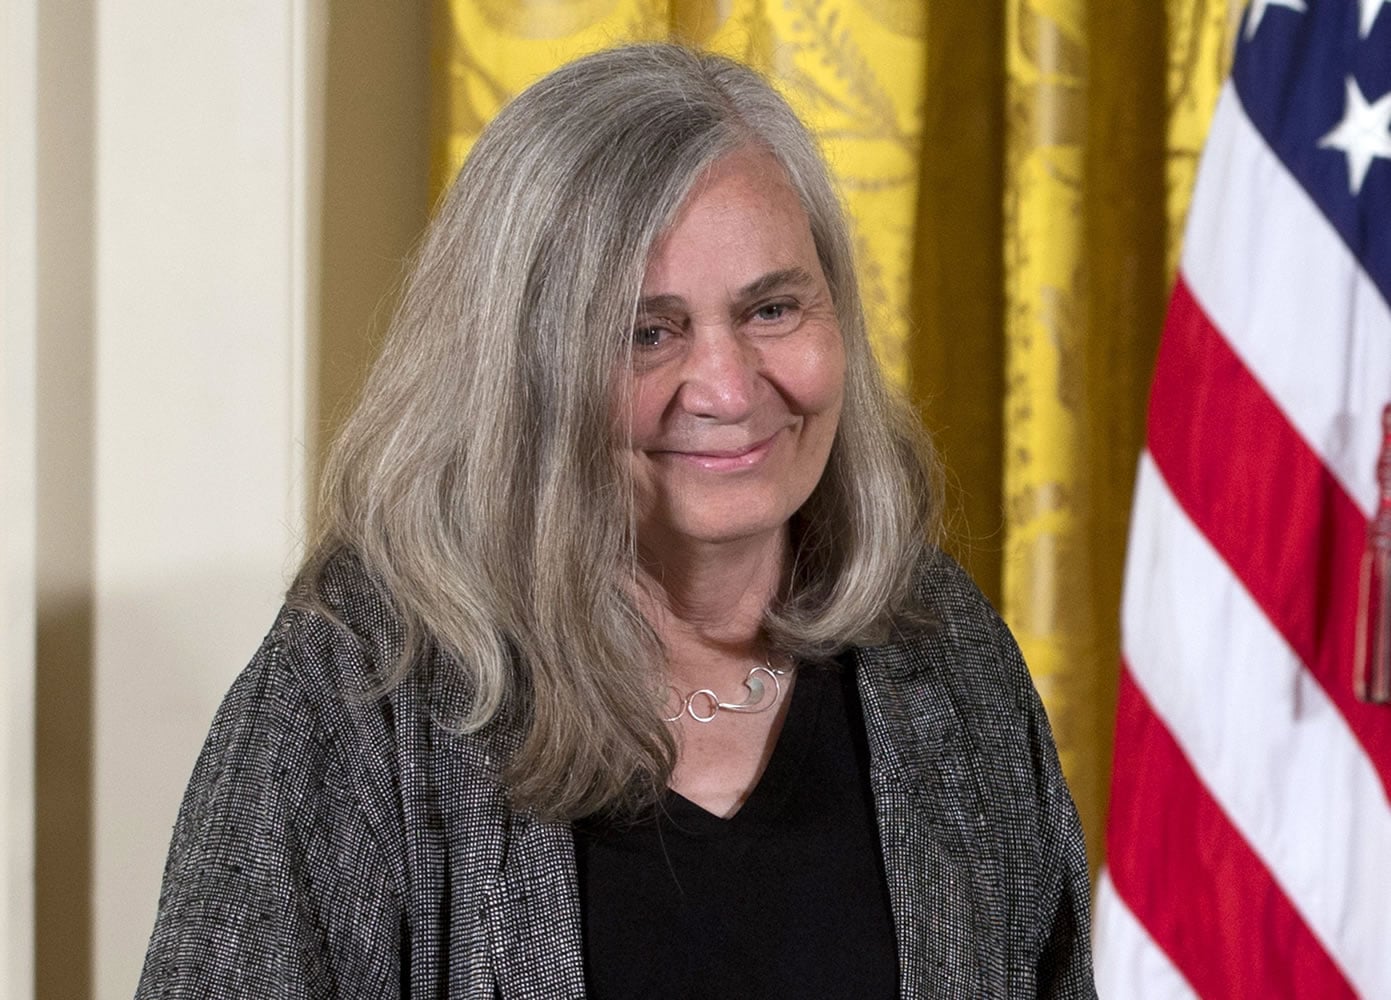 Marilynne Robinson is the winner of the Library of Congress Prize for American Fiction.